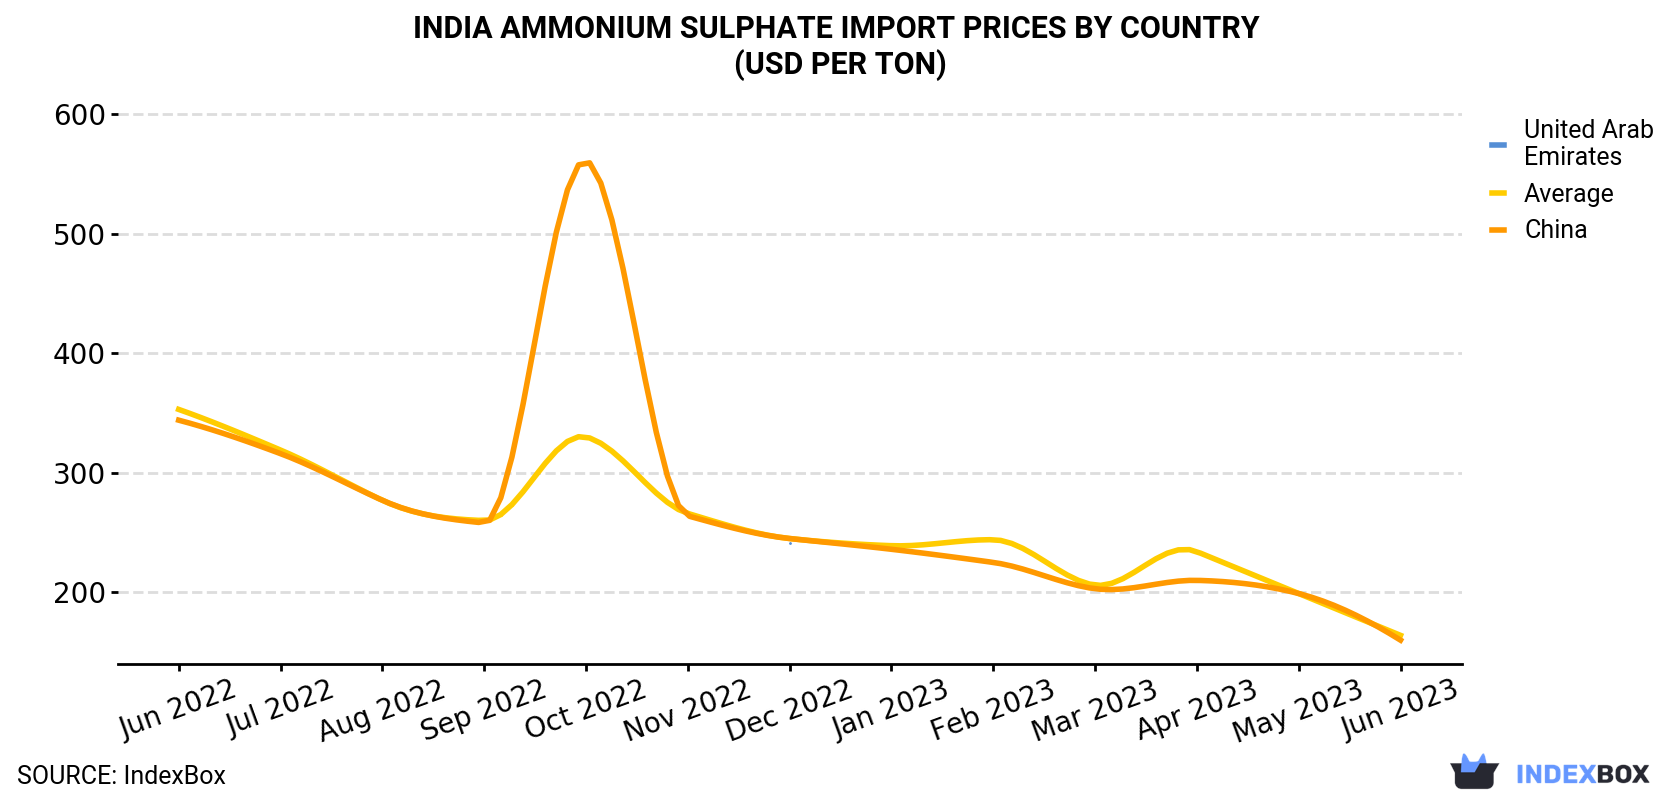 India Ammonium Sulphate Import Prices By Country (USD Per Ton)